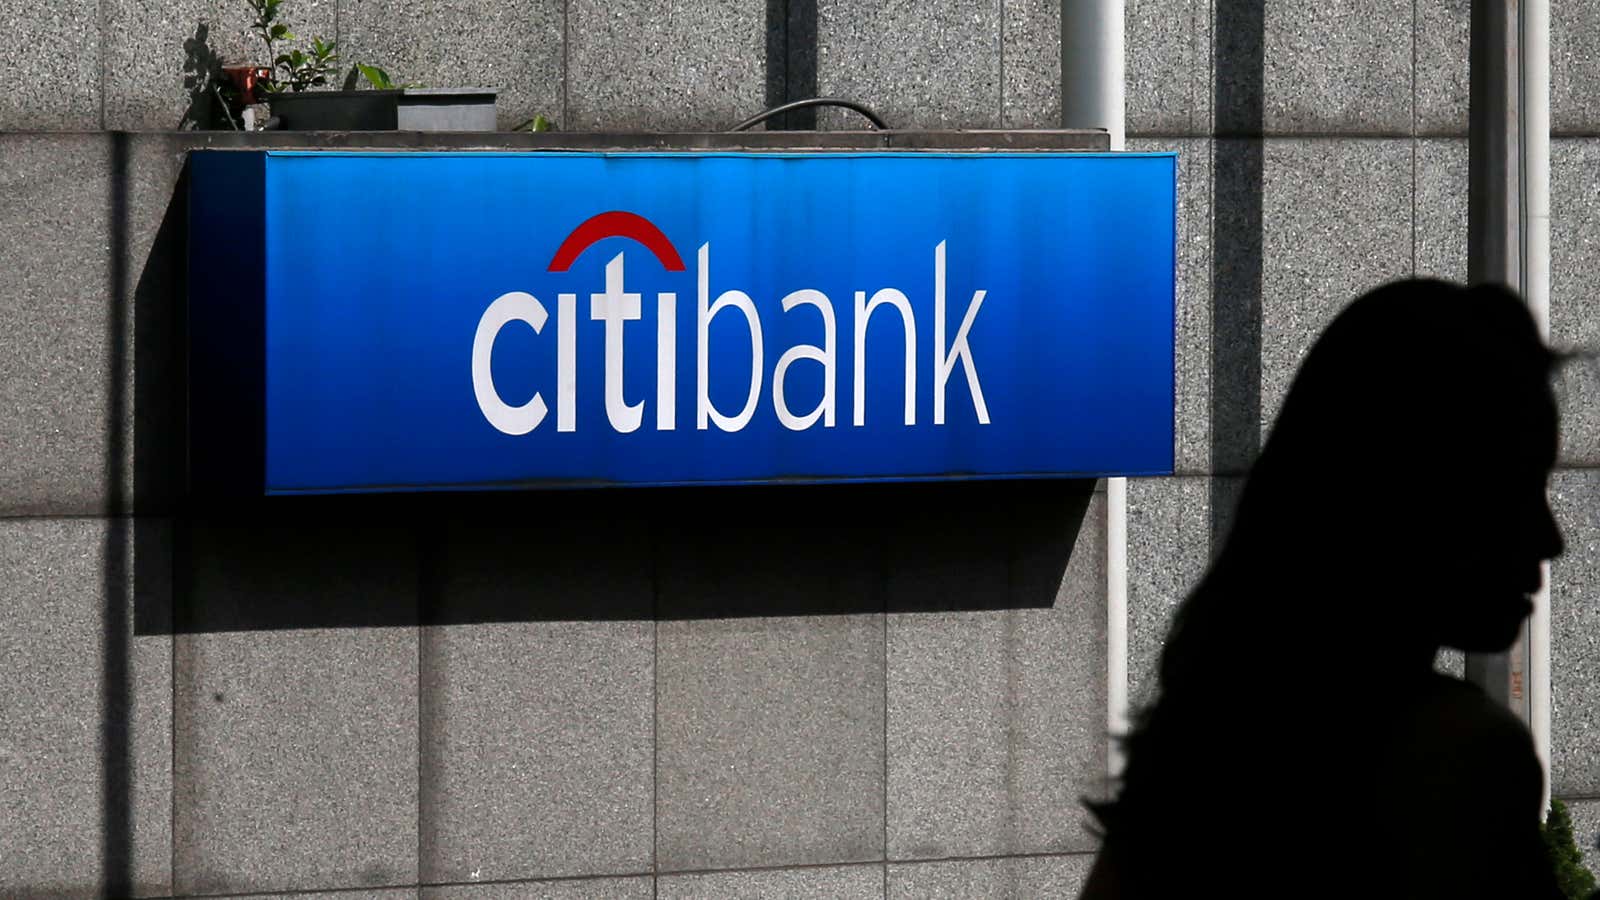 Citigroup will close the 1% pay gap between men and women, it promises.